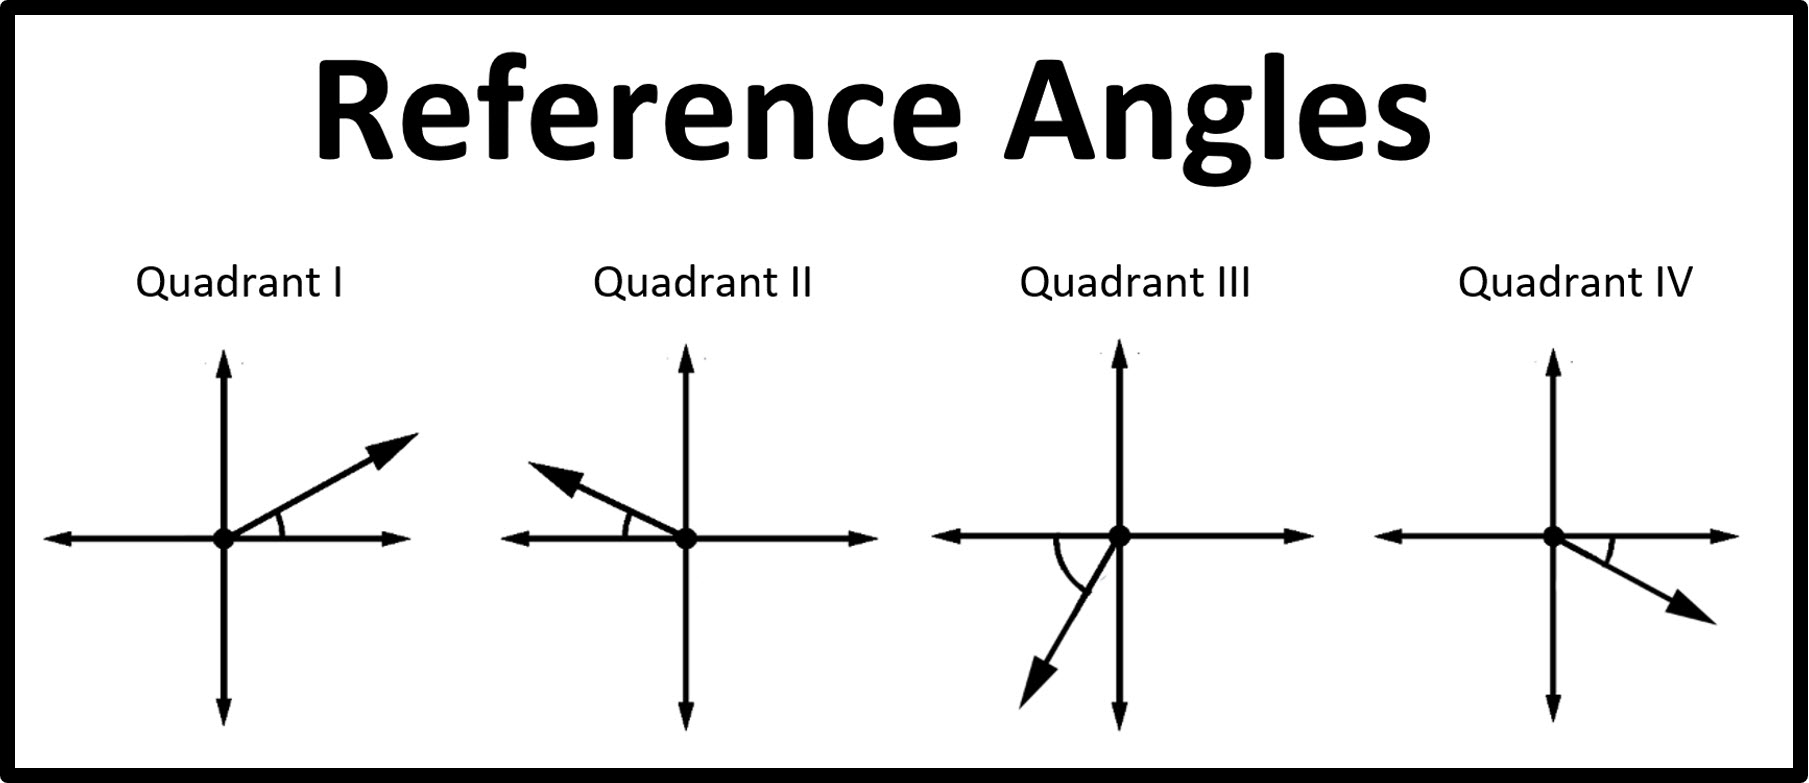 Notes for Reference Angles